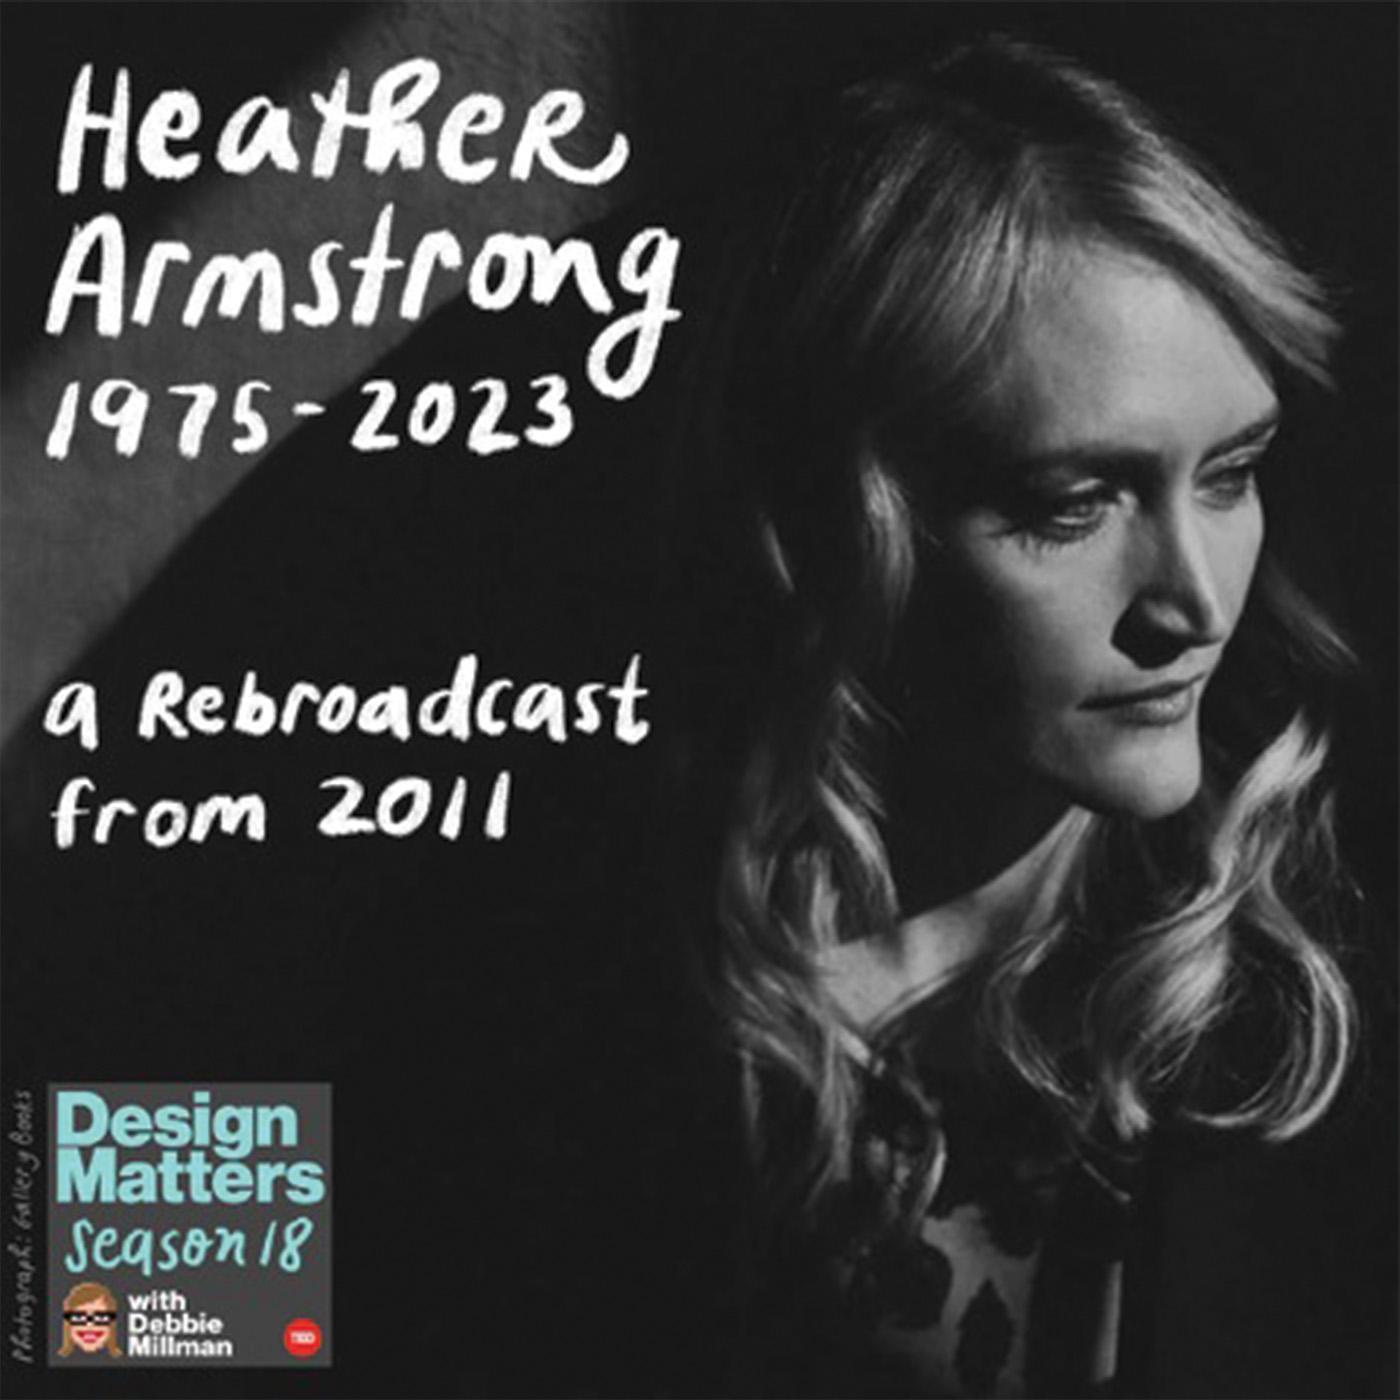 Thumbnail for "Heather Armstrong: A Rebroadcast from 2011".